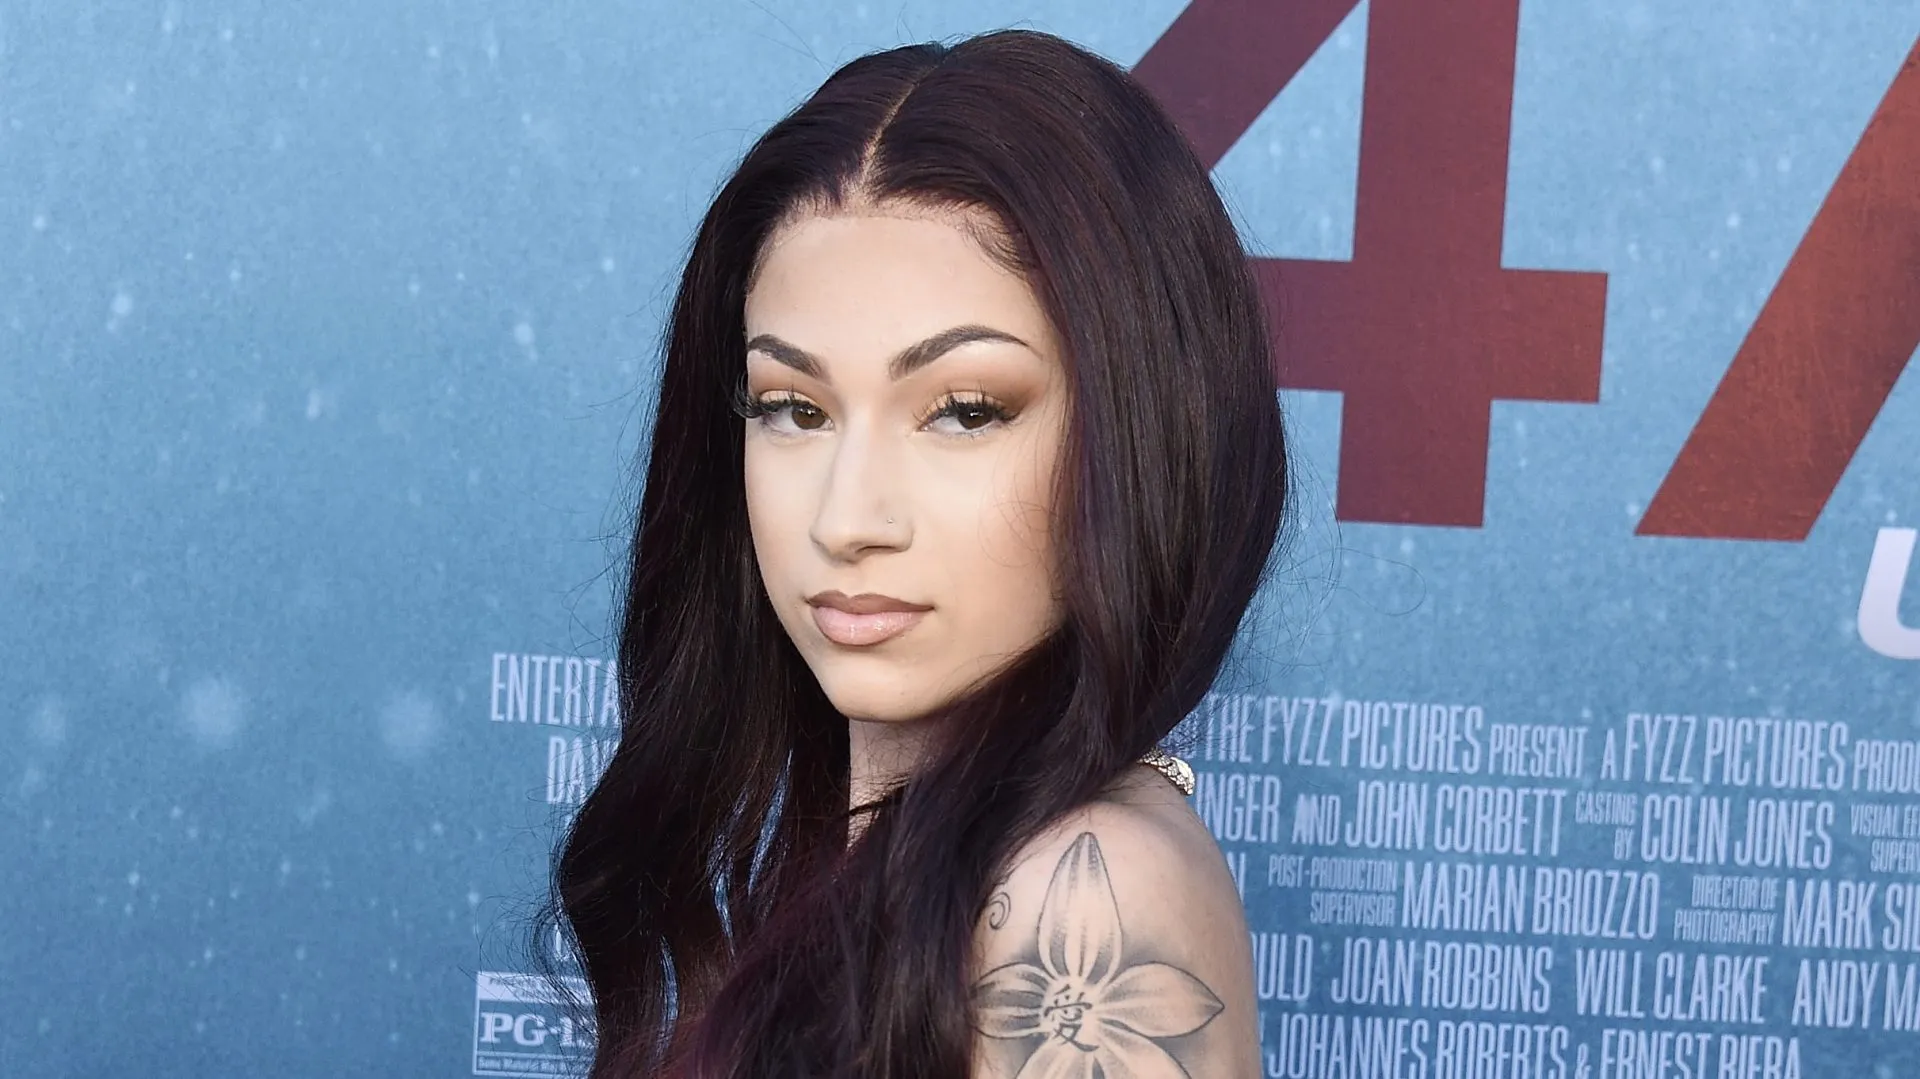 Bhad Bhabie Celebrates Valentine’s Day With Baby Shower For Daughter Kali Love